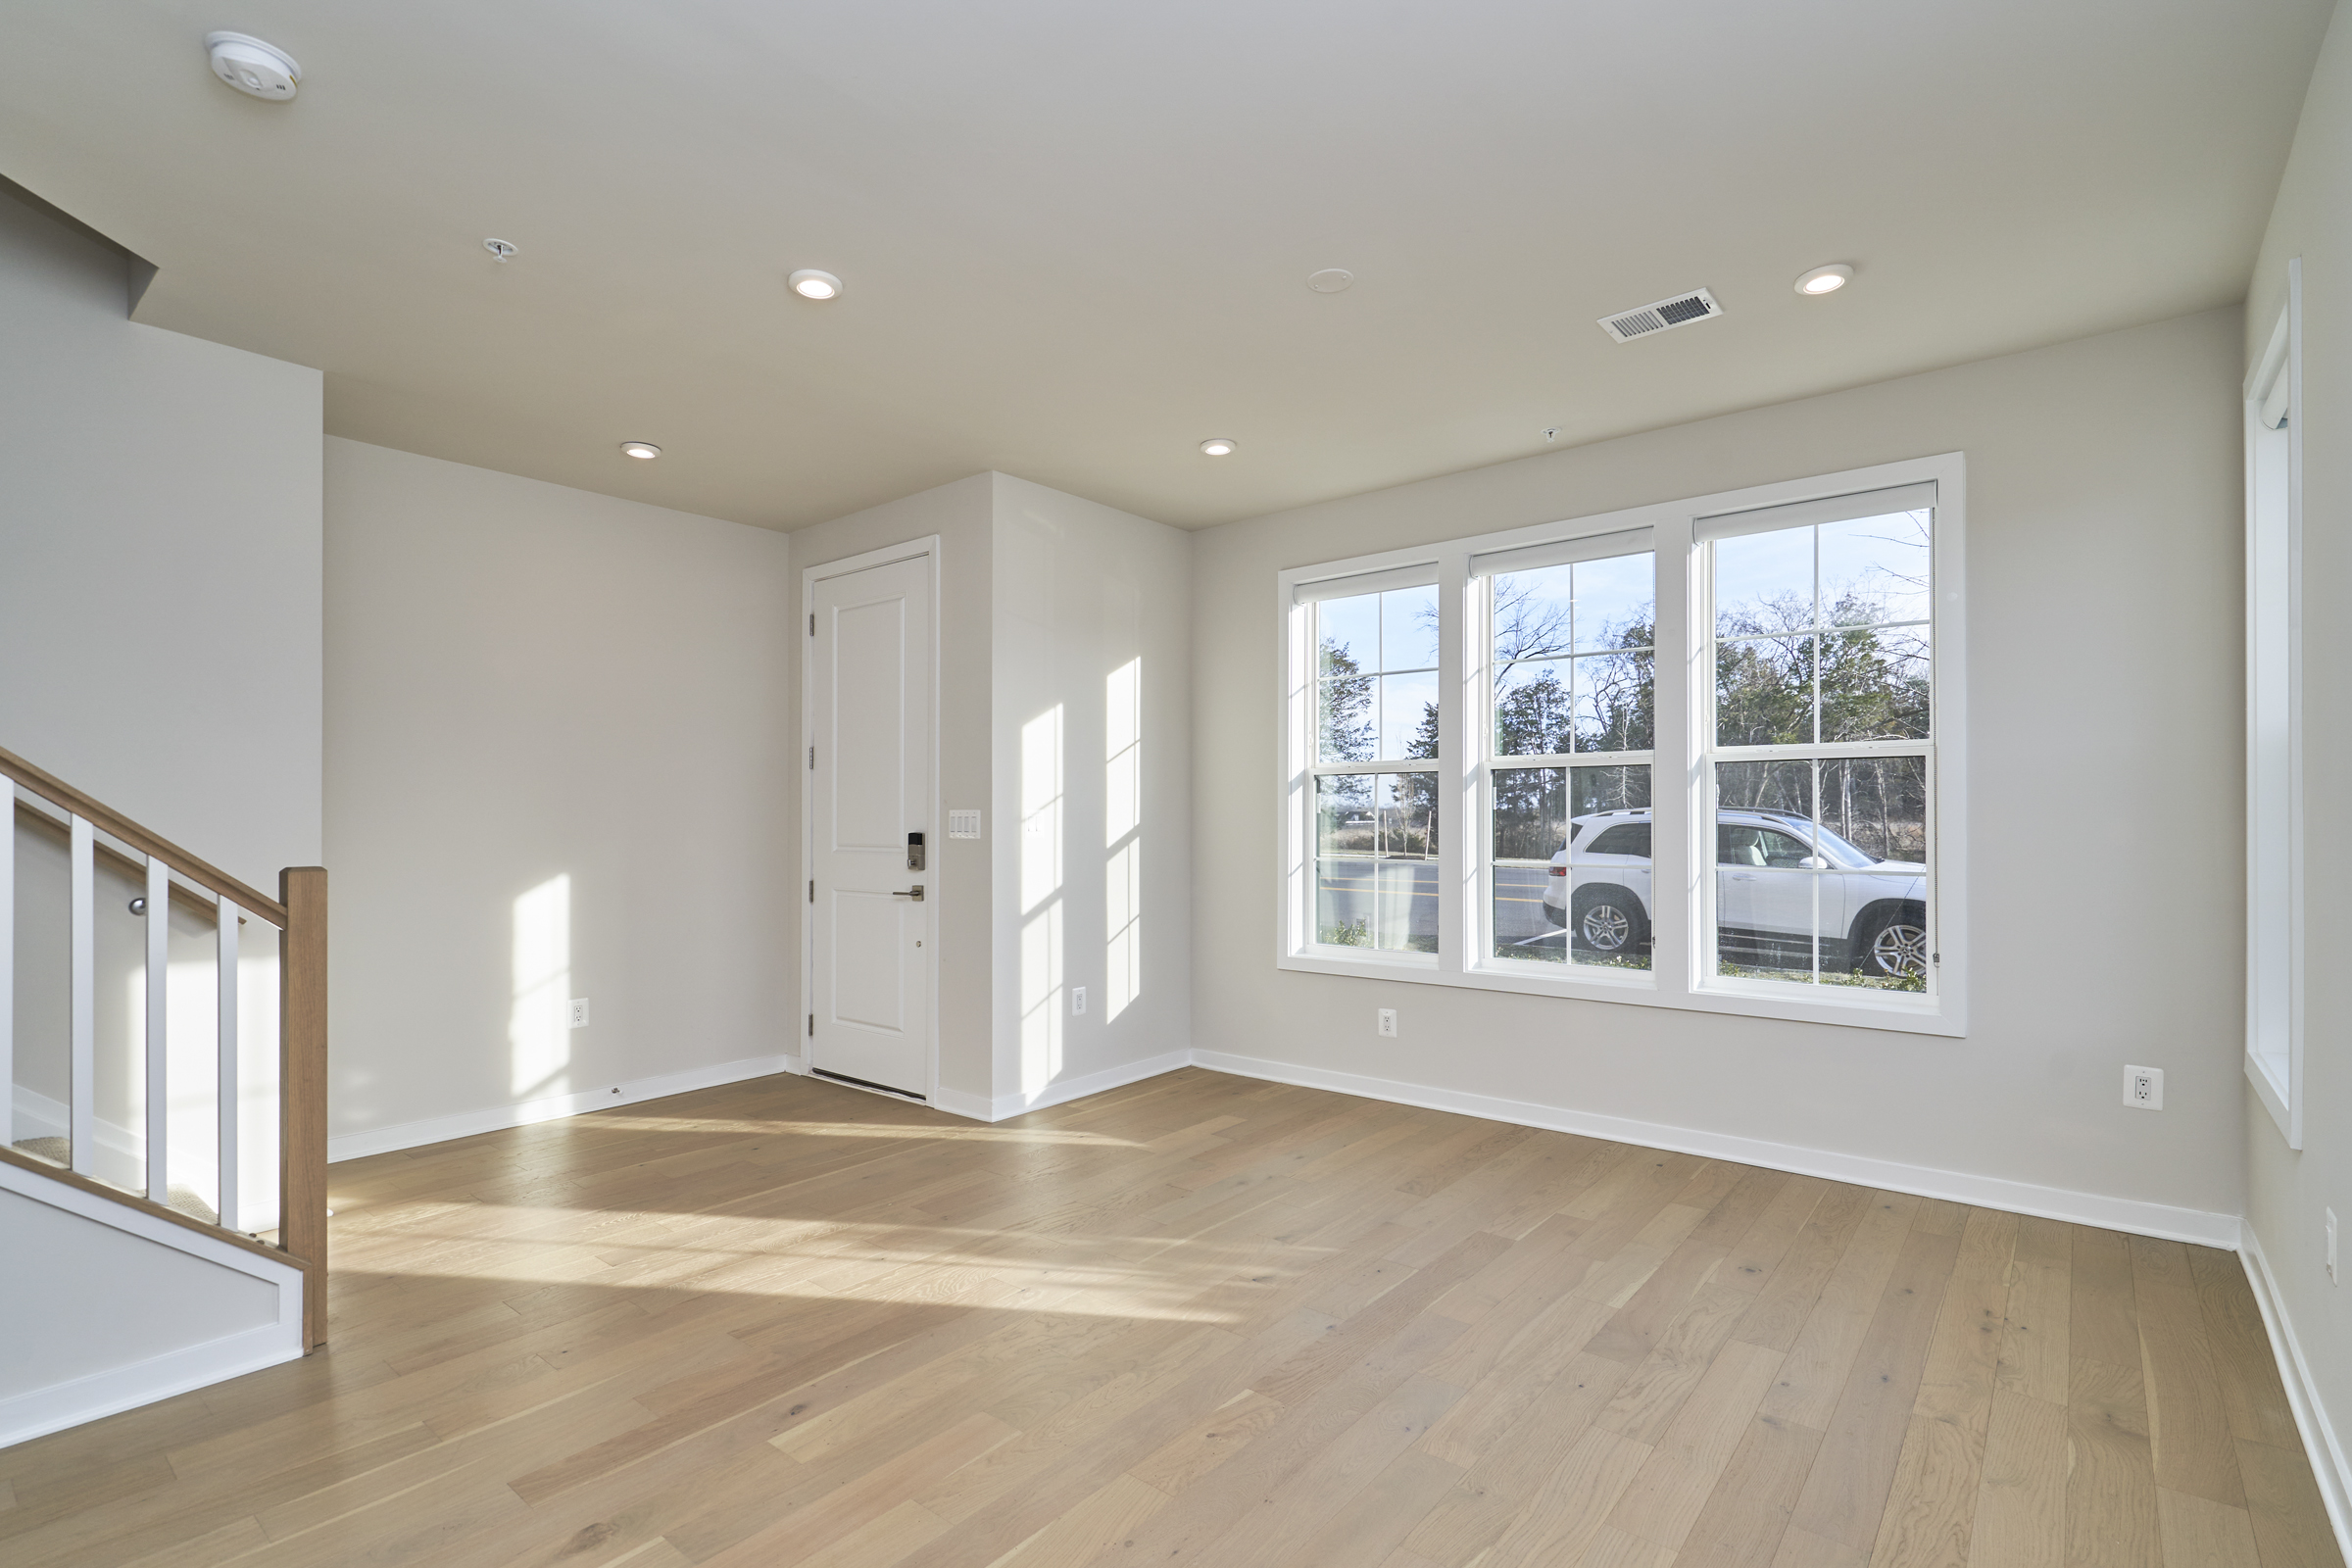 Interior professional photo of 43522 Centergate Drive - showing the main entrance and living room on the ground floor.